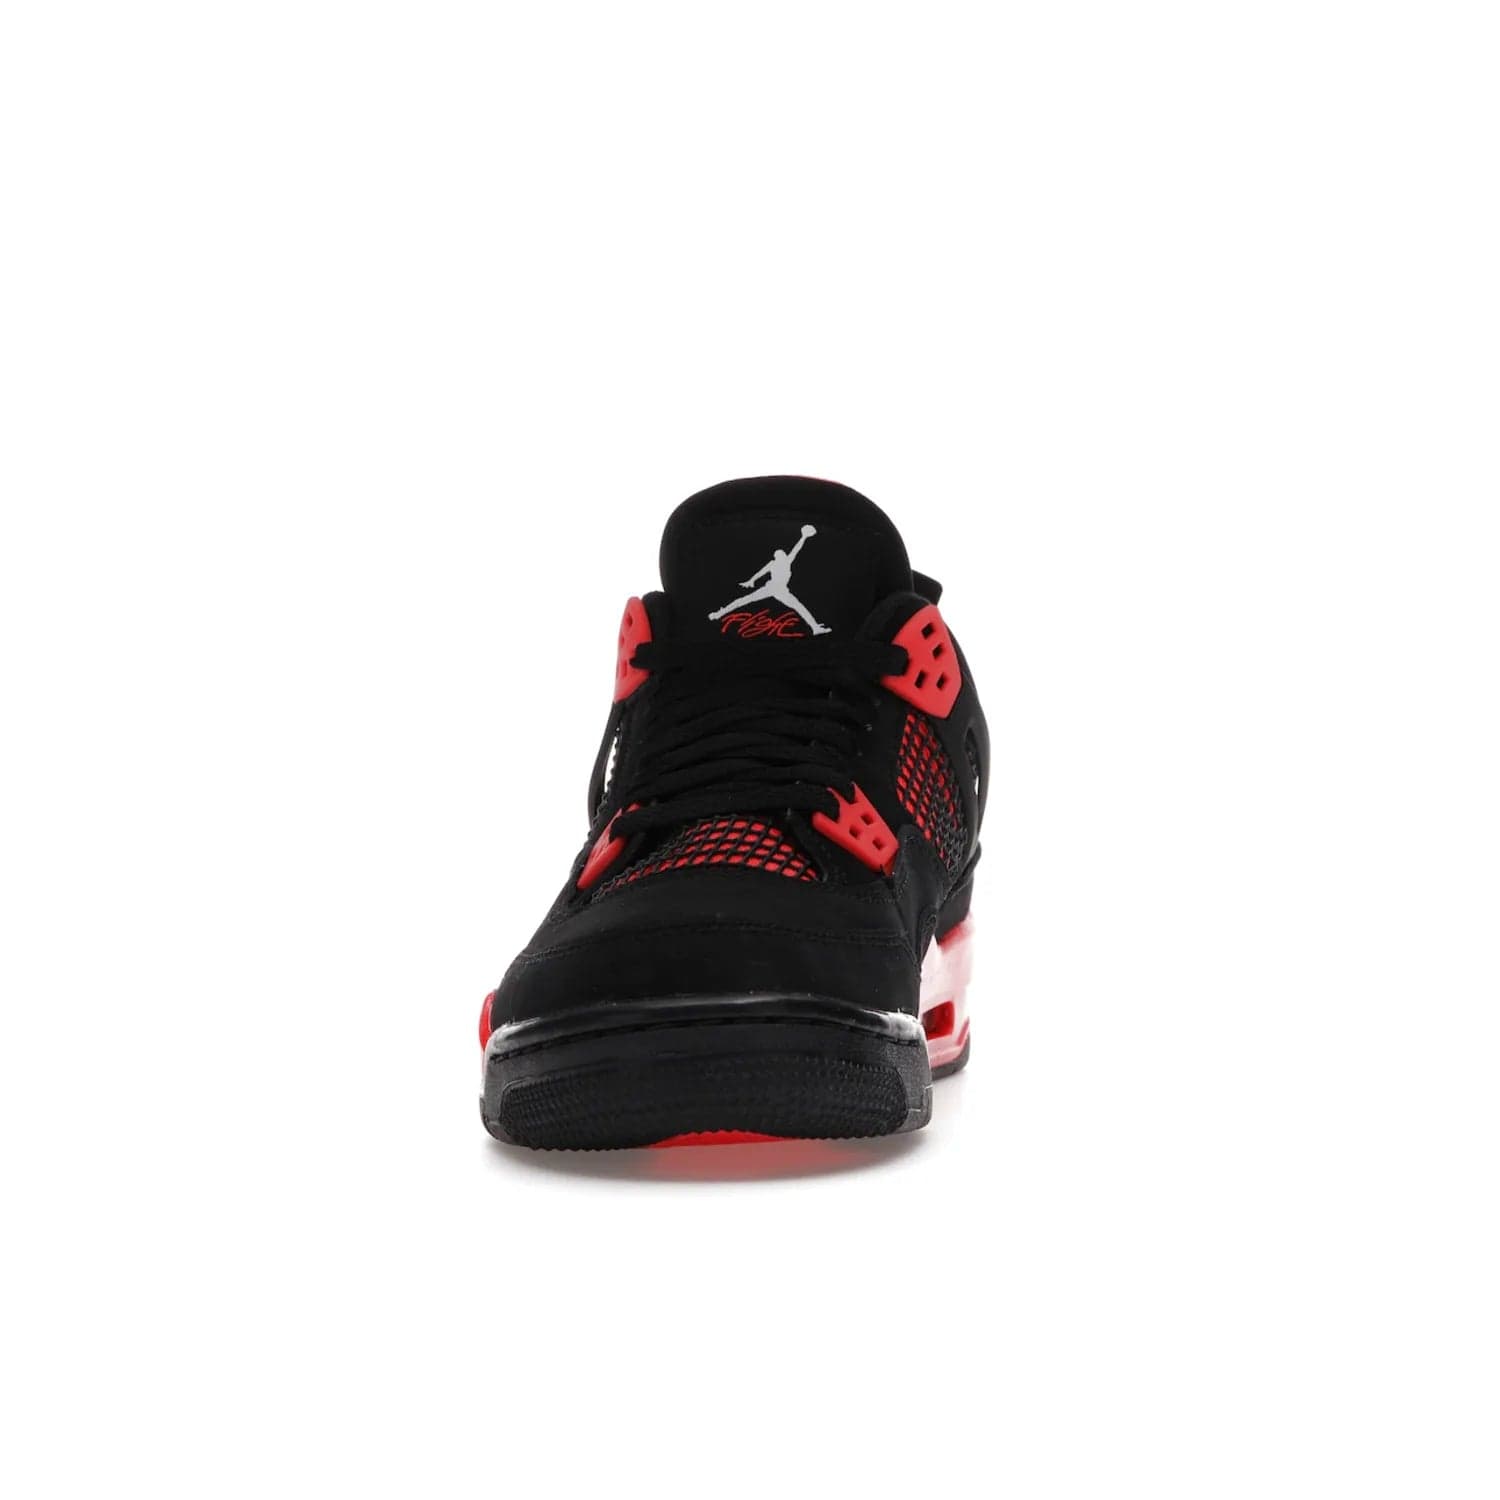 Jordan 4 Retro Red Thunder (GS) - Image 11 - Only at www.BallersClubKickz.com - The Air Jordan 4 Retro Red Thunder GS features a stylish black and crimson upper with a Jumpman logo. Athletic midsole with Air bubbles for cushioning and black rubber outsole with iconic motif complete this classic sneaker.